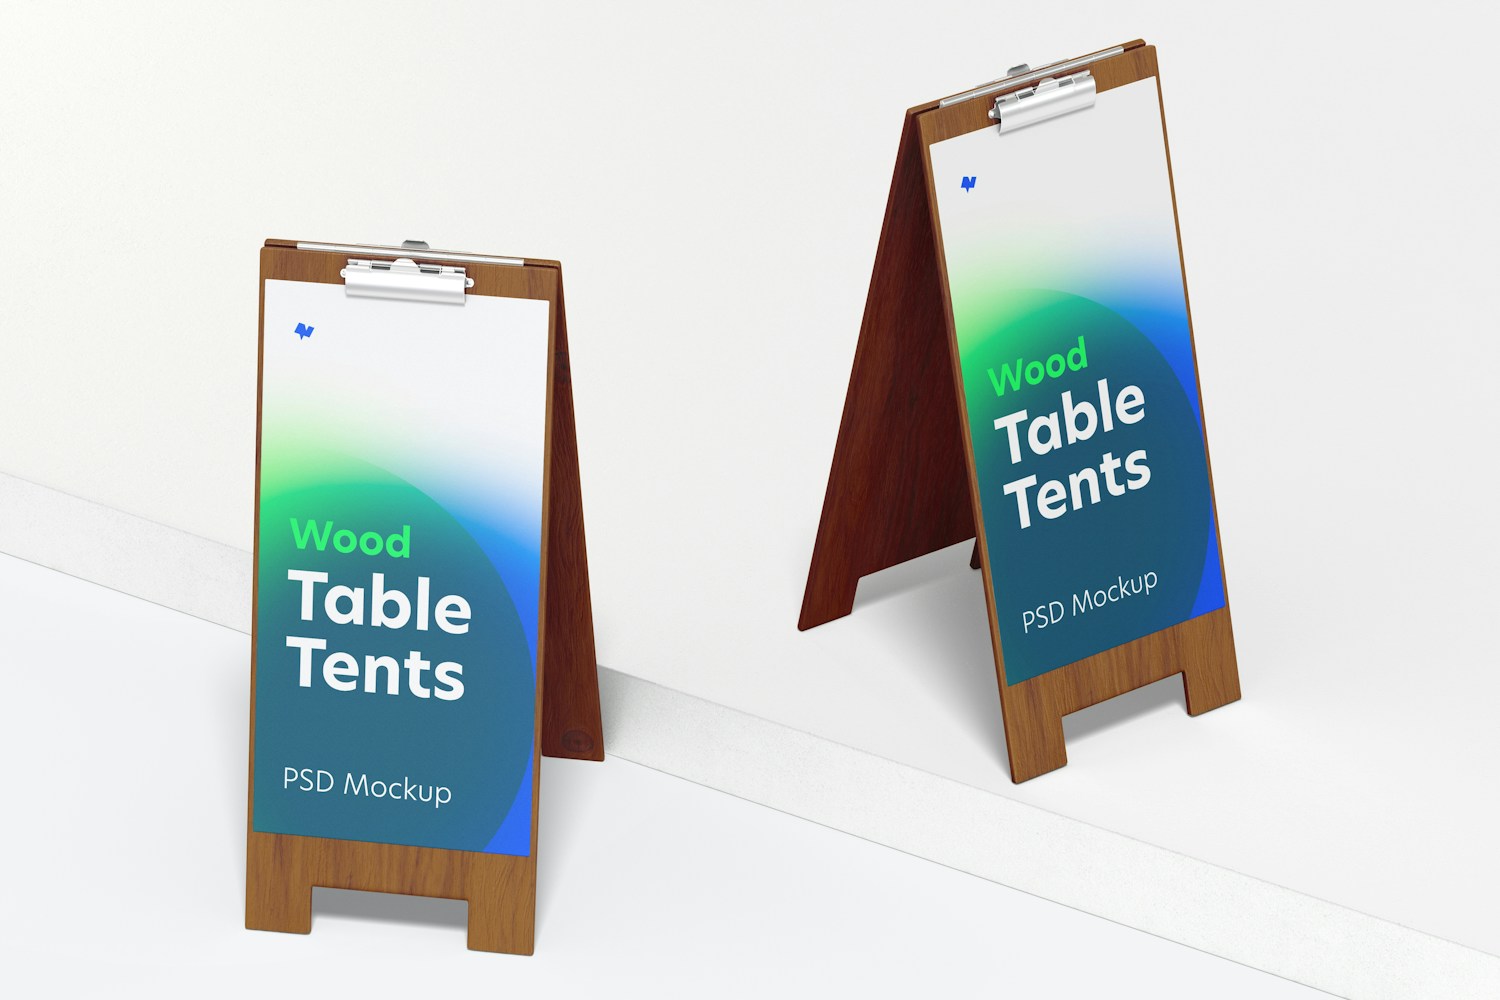 Wood Table Tents with Clip Mockup, Front View